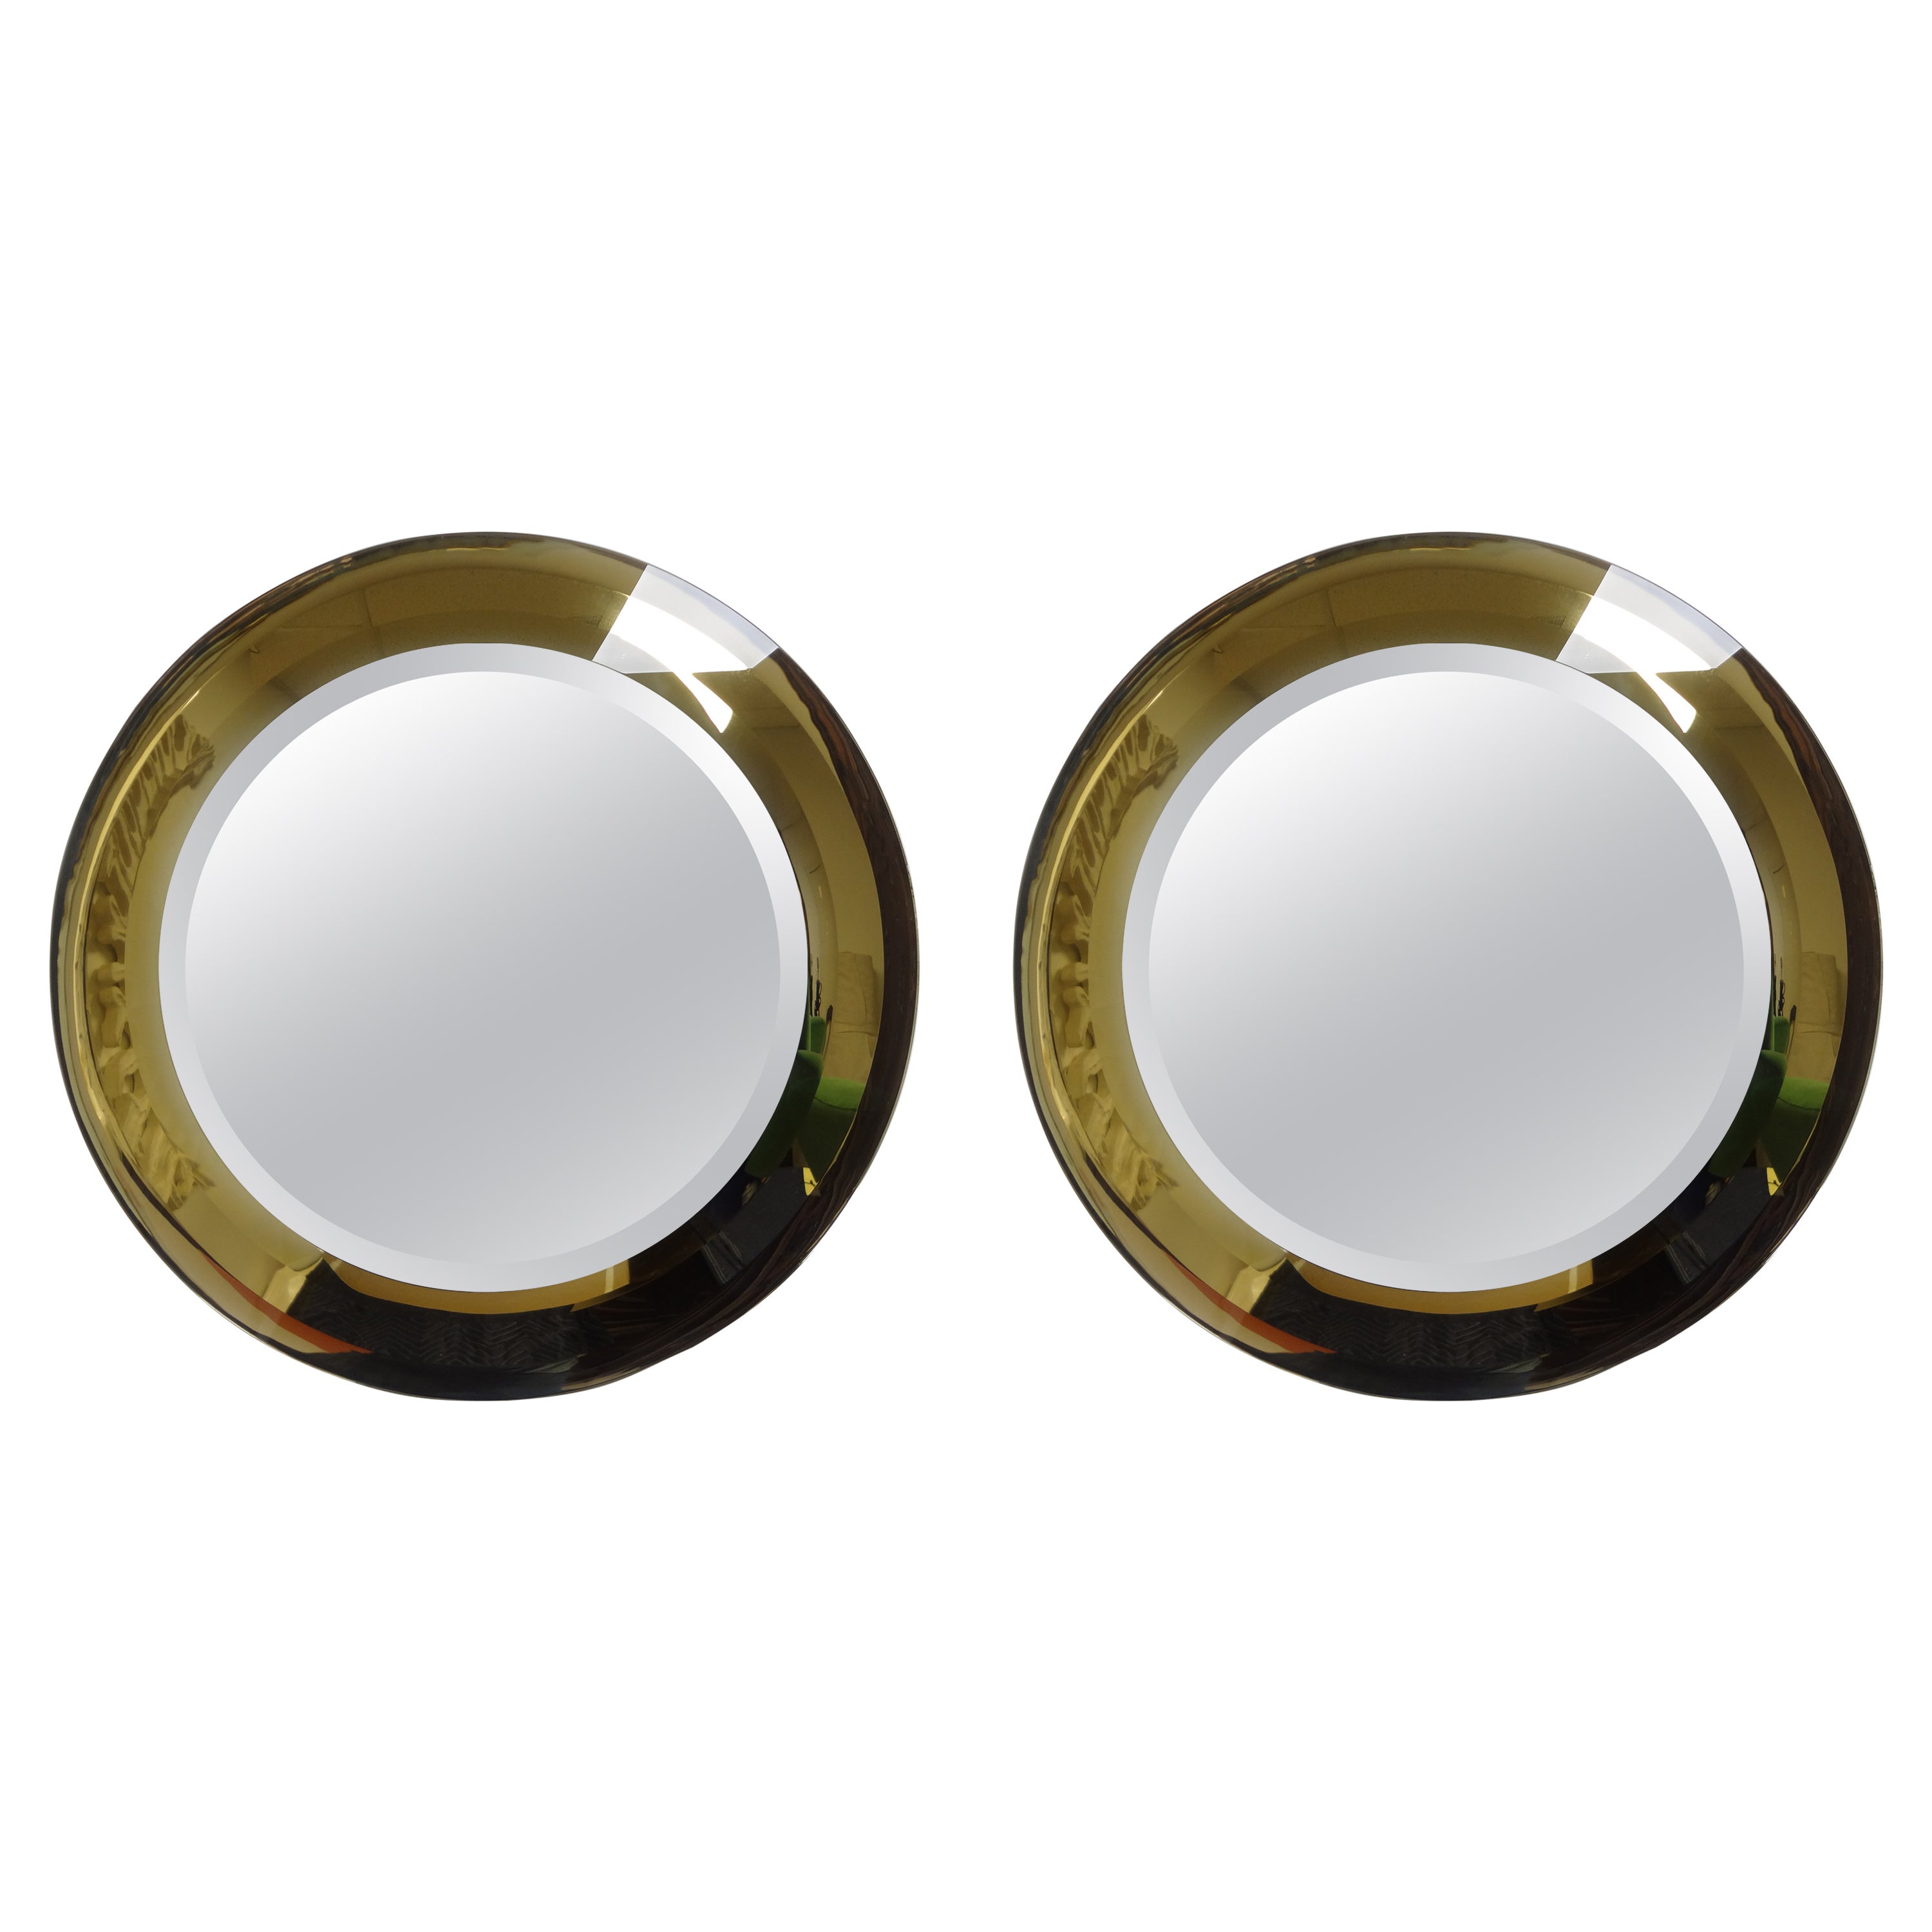 Pair Of Italian Fontana Arte Attributed Beveled Mirrors For Sale